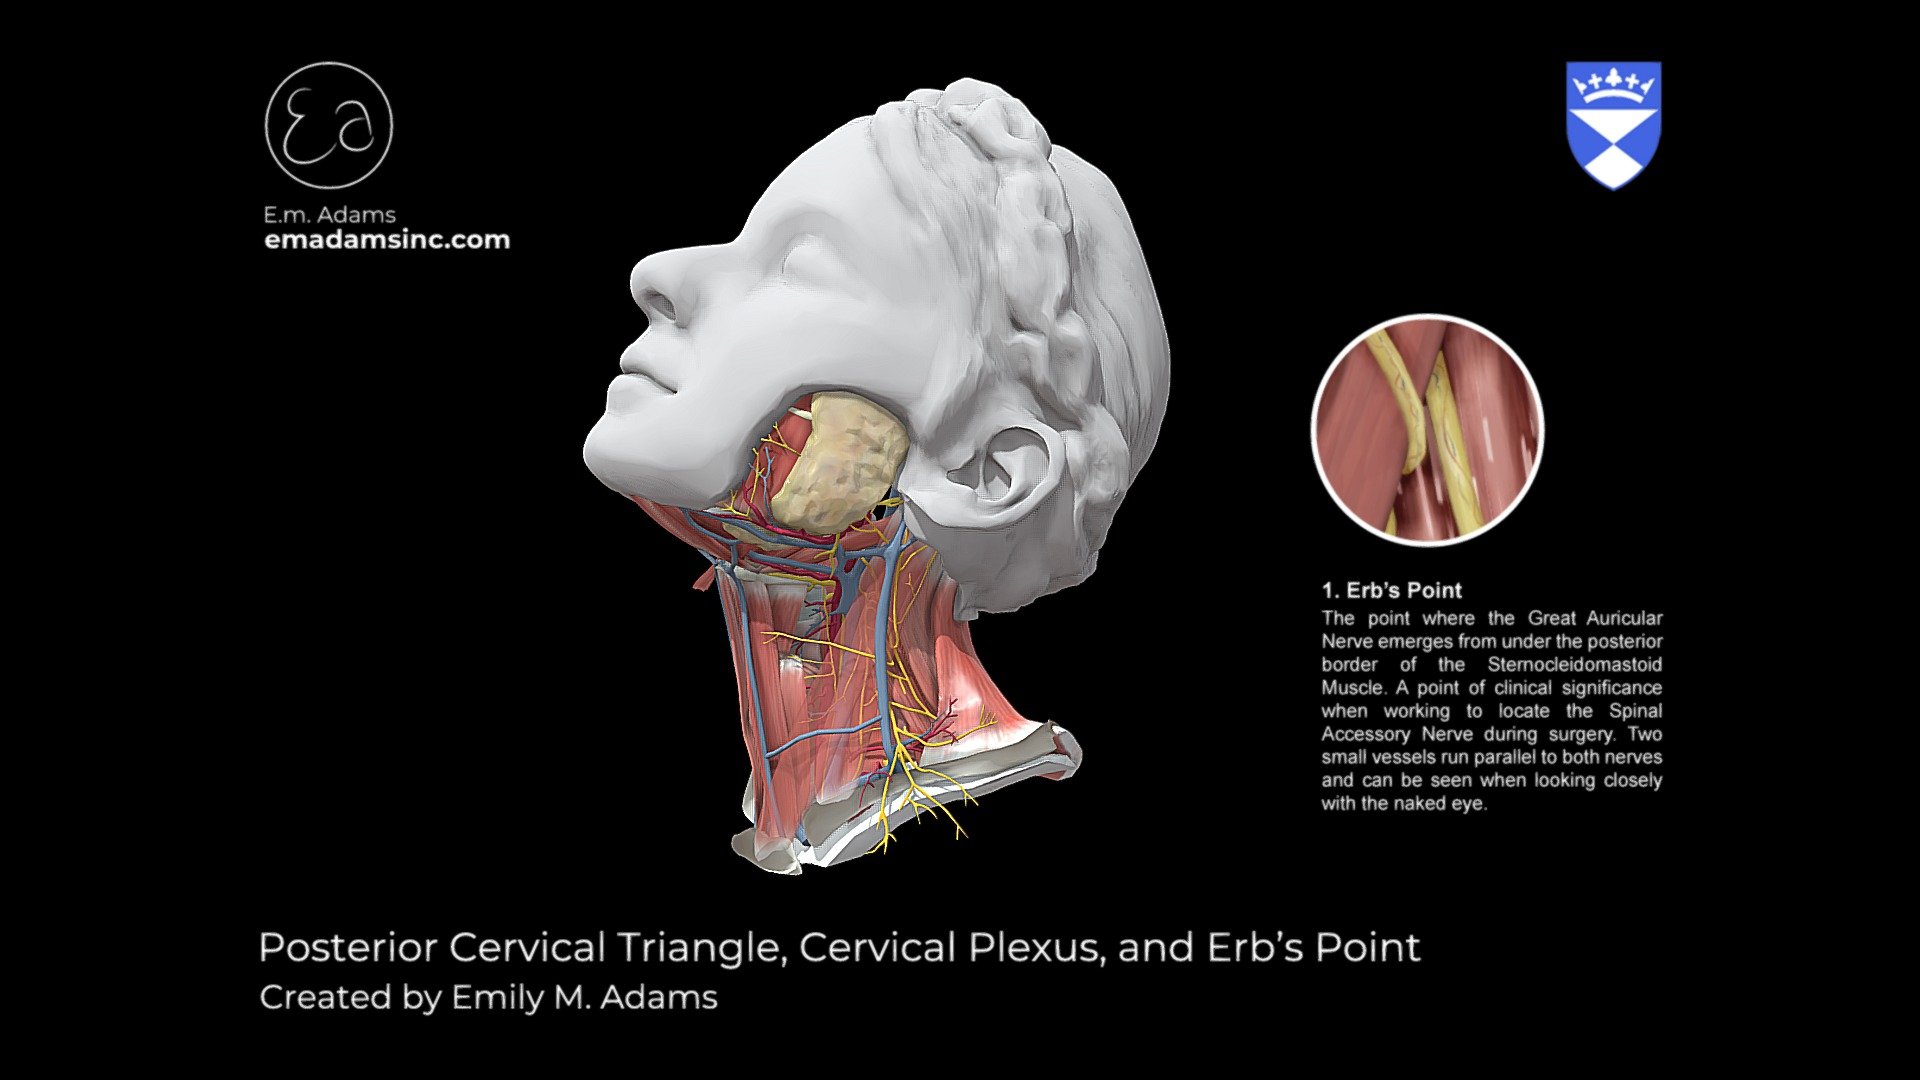 Depicts the major structures of the posterior cervical triangle and the nerves that arise from the cervical plexus as well as Erb's point a major clinical marker for head and neck surgery and dissection. One side has the sternocleidomastoid muscle retracted showing the nerves deep to the muscle the other side shows the terminal ends of cutaneous nerves that loop around the sternocleidomastoid and innervate more superficial structures.

© Emily M. Adams |2020 MSc Medical Art Student | emadamsinc.com - Posterior Cervical Triangle and Erb's Point - 3D model by University of Dundee, CAHID (@anatomy_dundee) 3d model